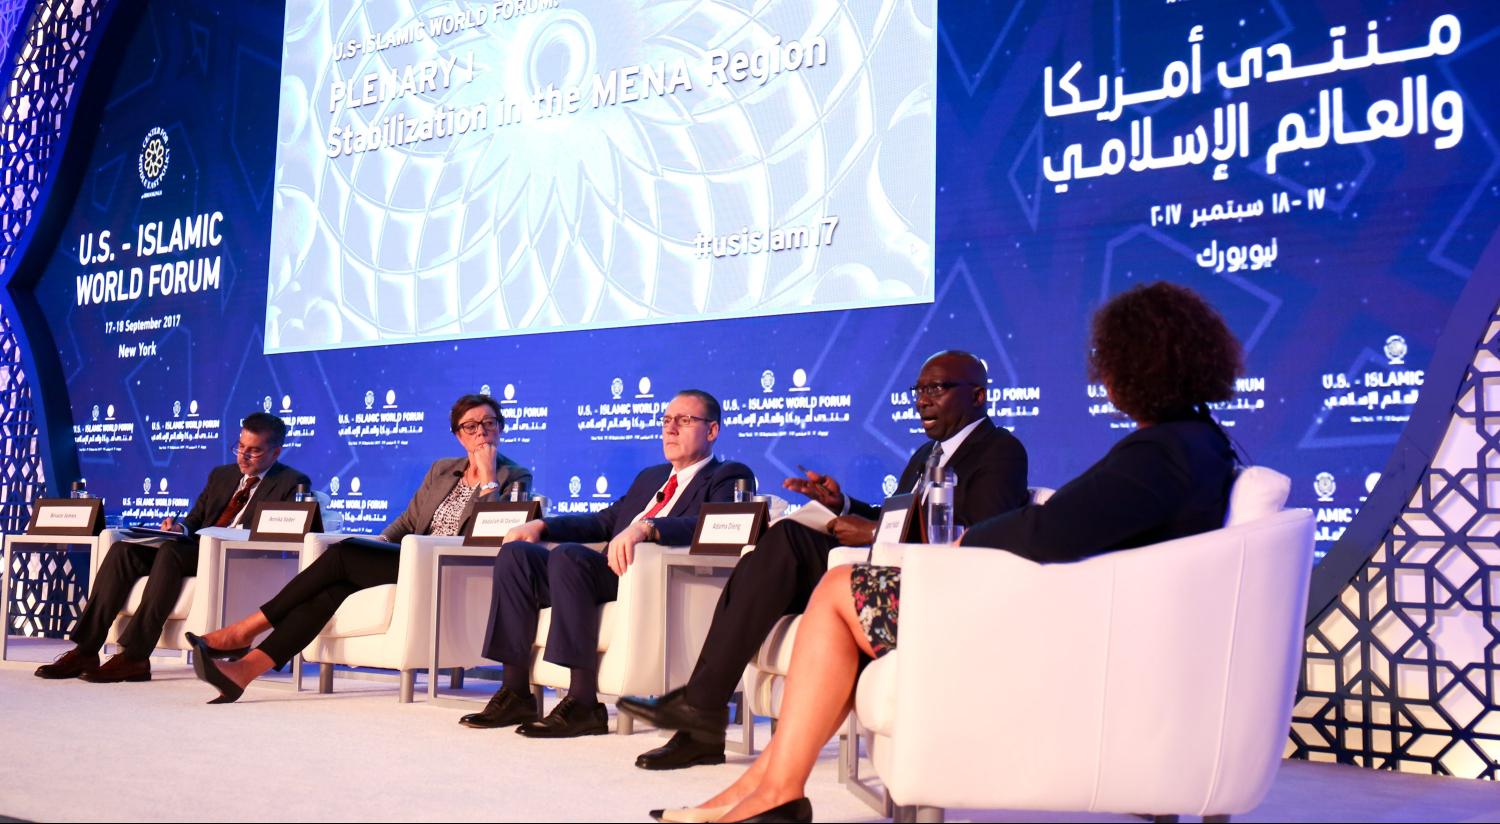 Photo of the first plenary panel at the 2017 US-Islamic World Forum.